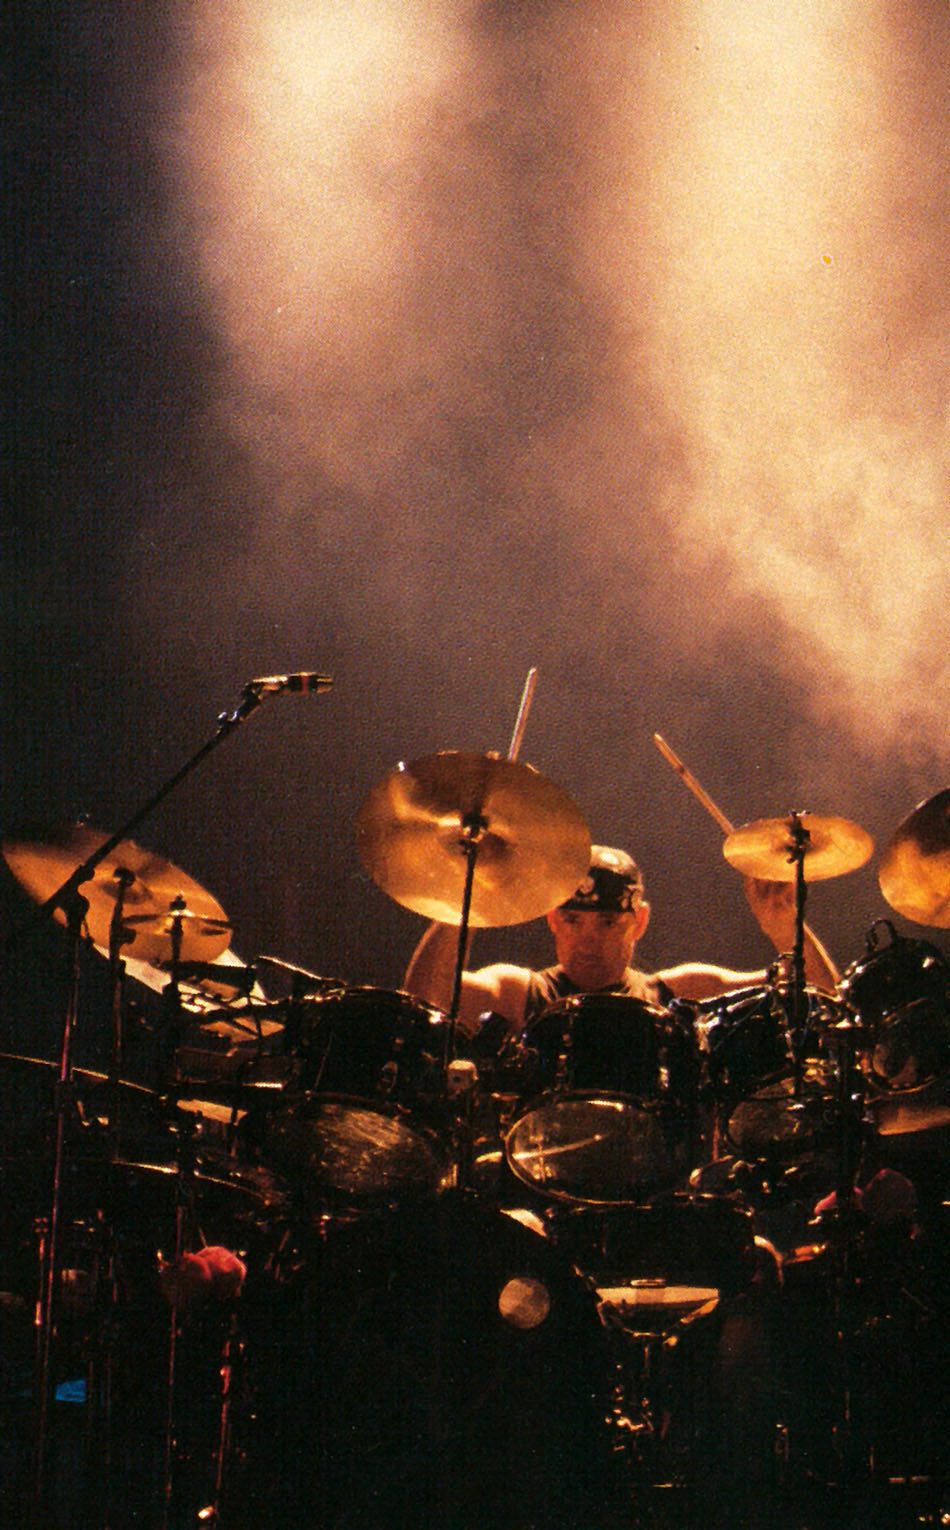 Rush Test for Echo Tour Book